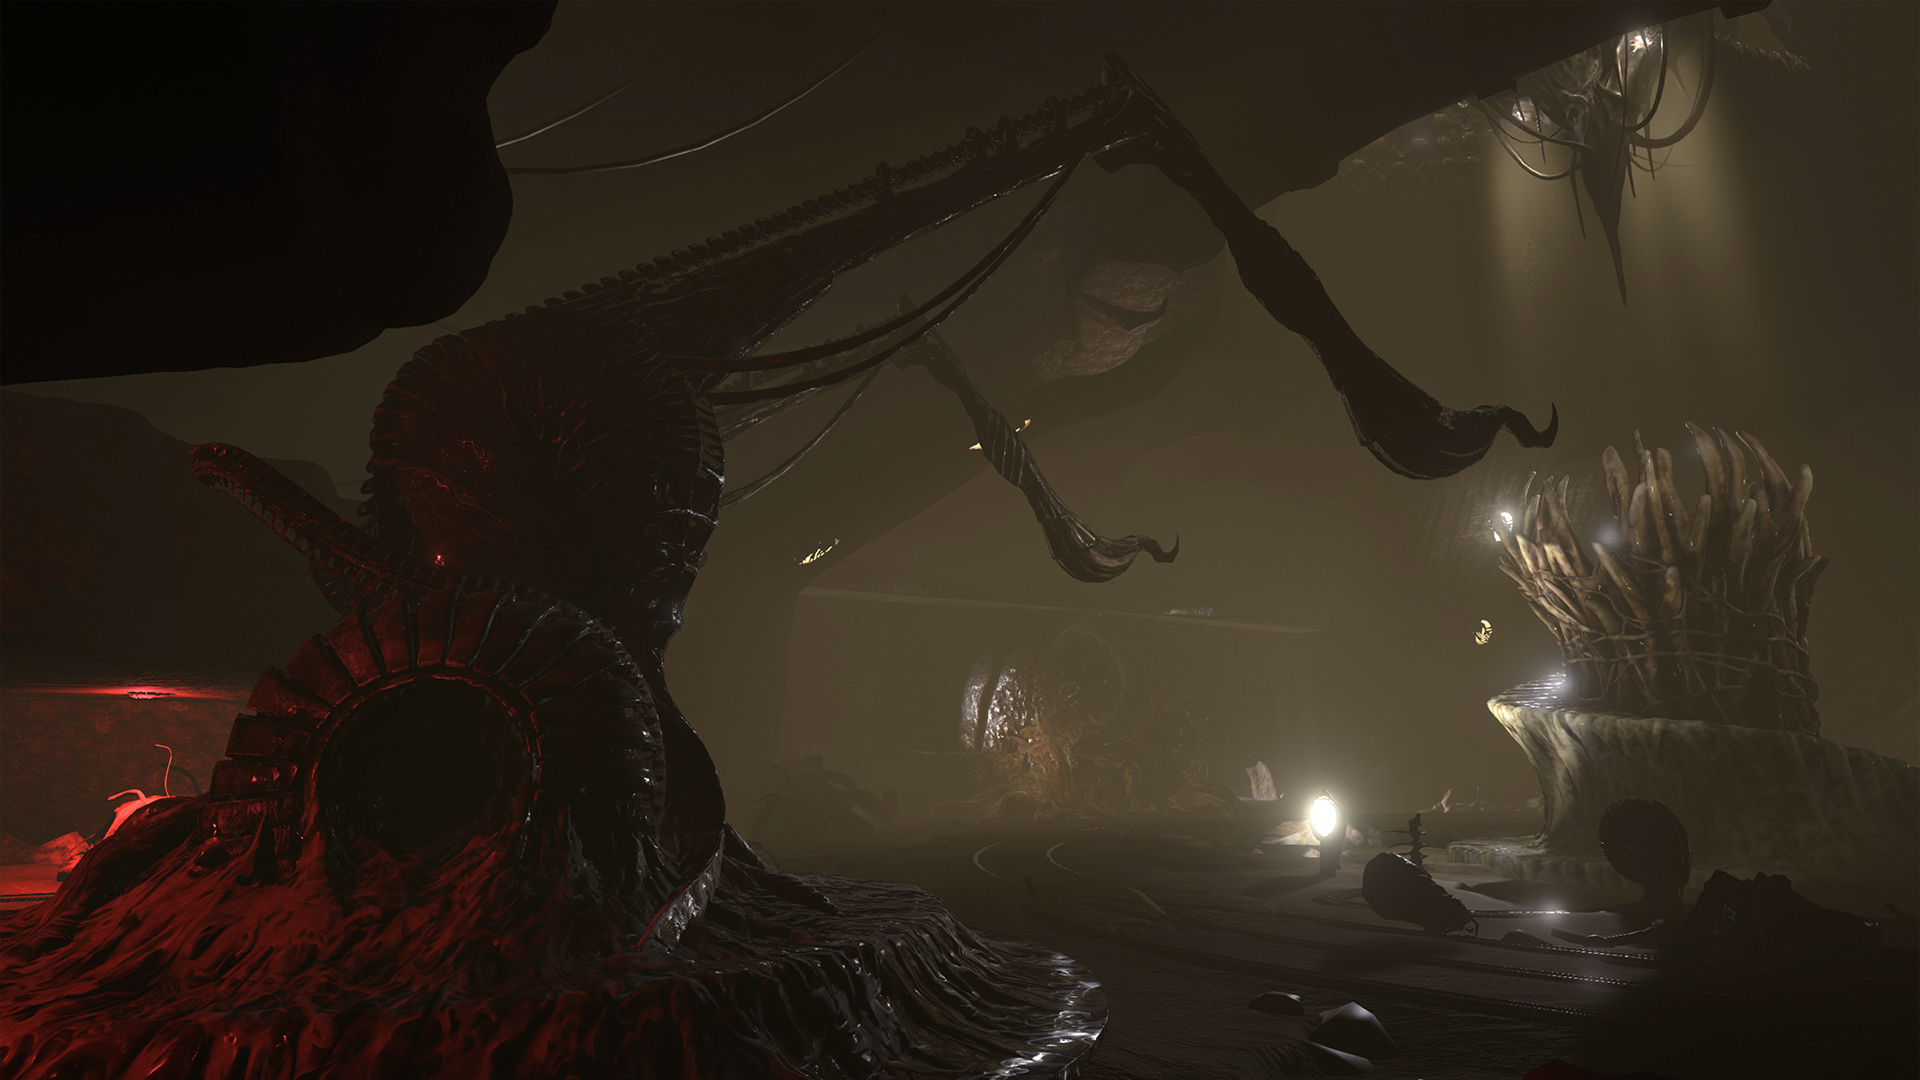 Scorn Atmospheric Horror Game Finally Receives Its First